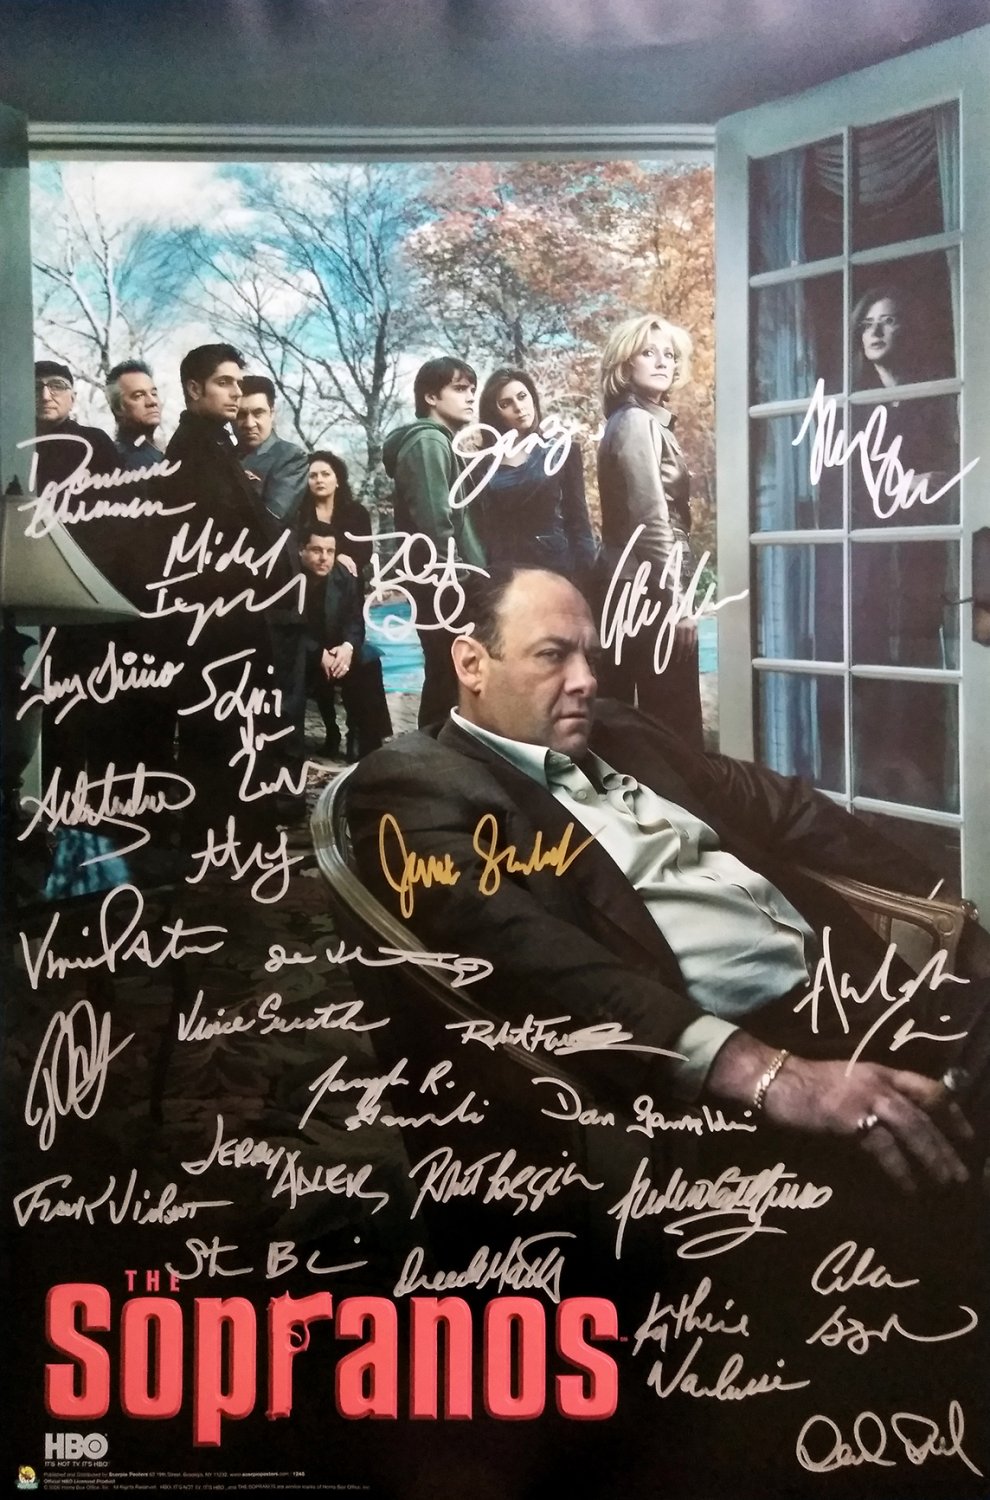 SOPRANOS FINAL SEASON Poster Signed by 28 cast members Excellent cond replica 